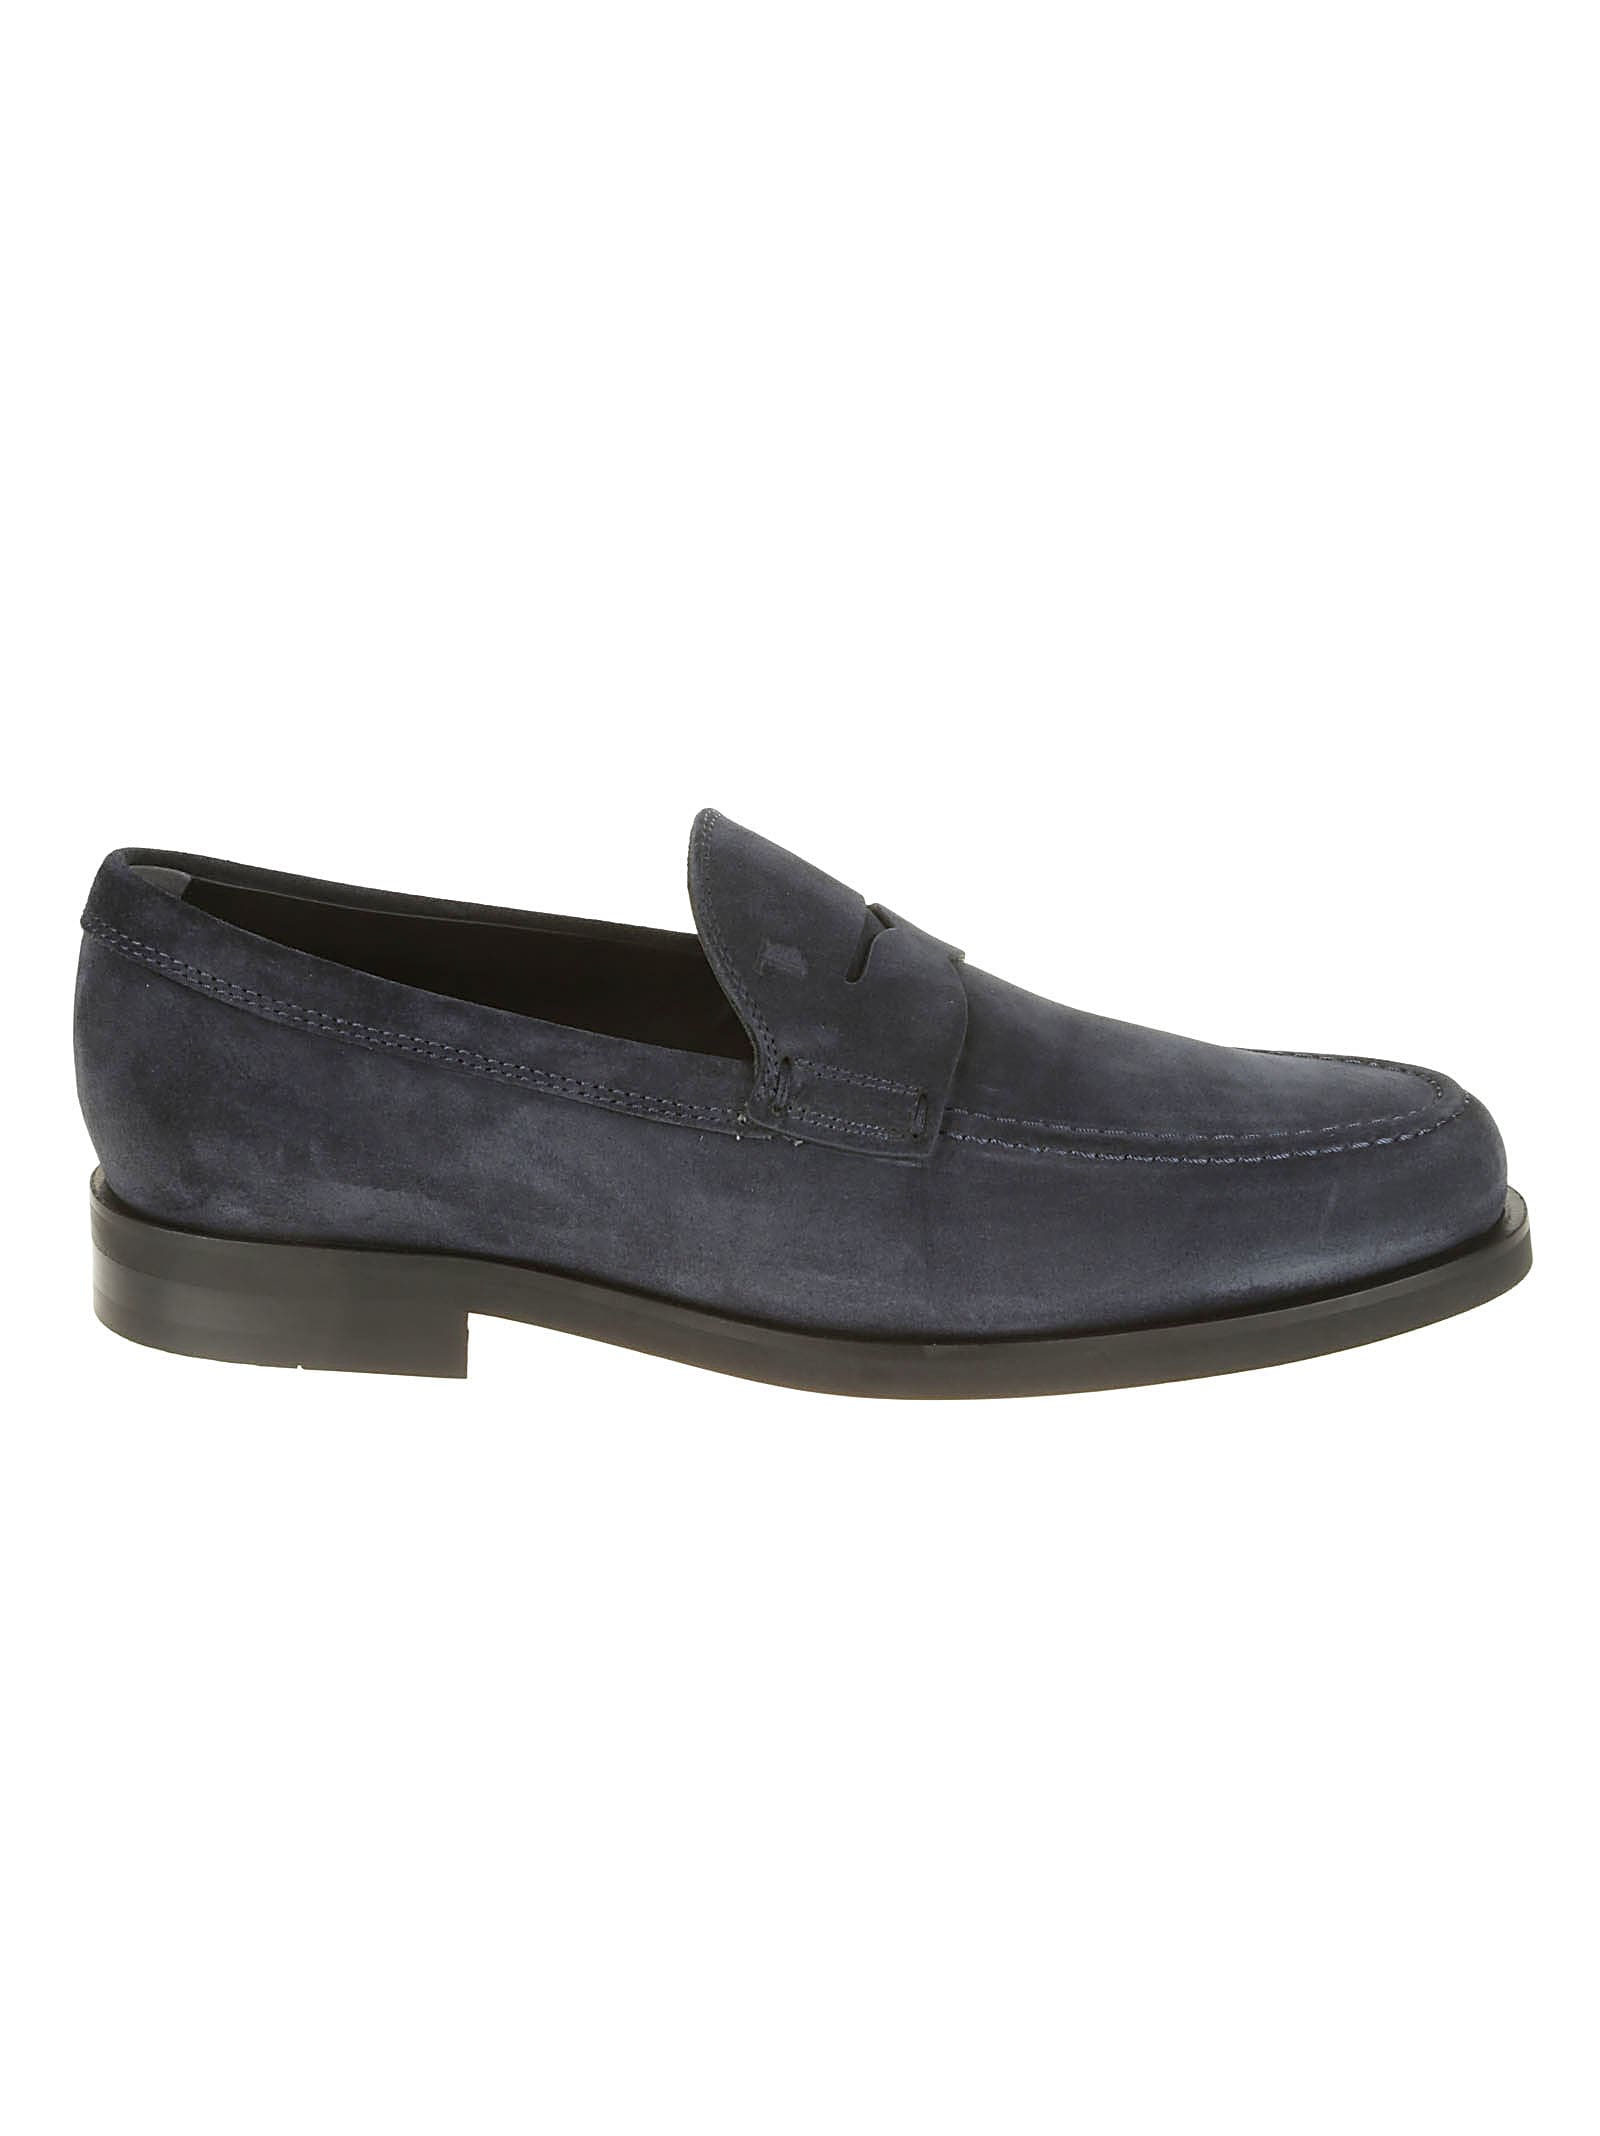 TOD'S PLAIN FORMAL LOAFERS